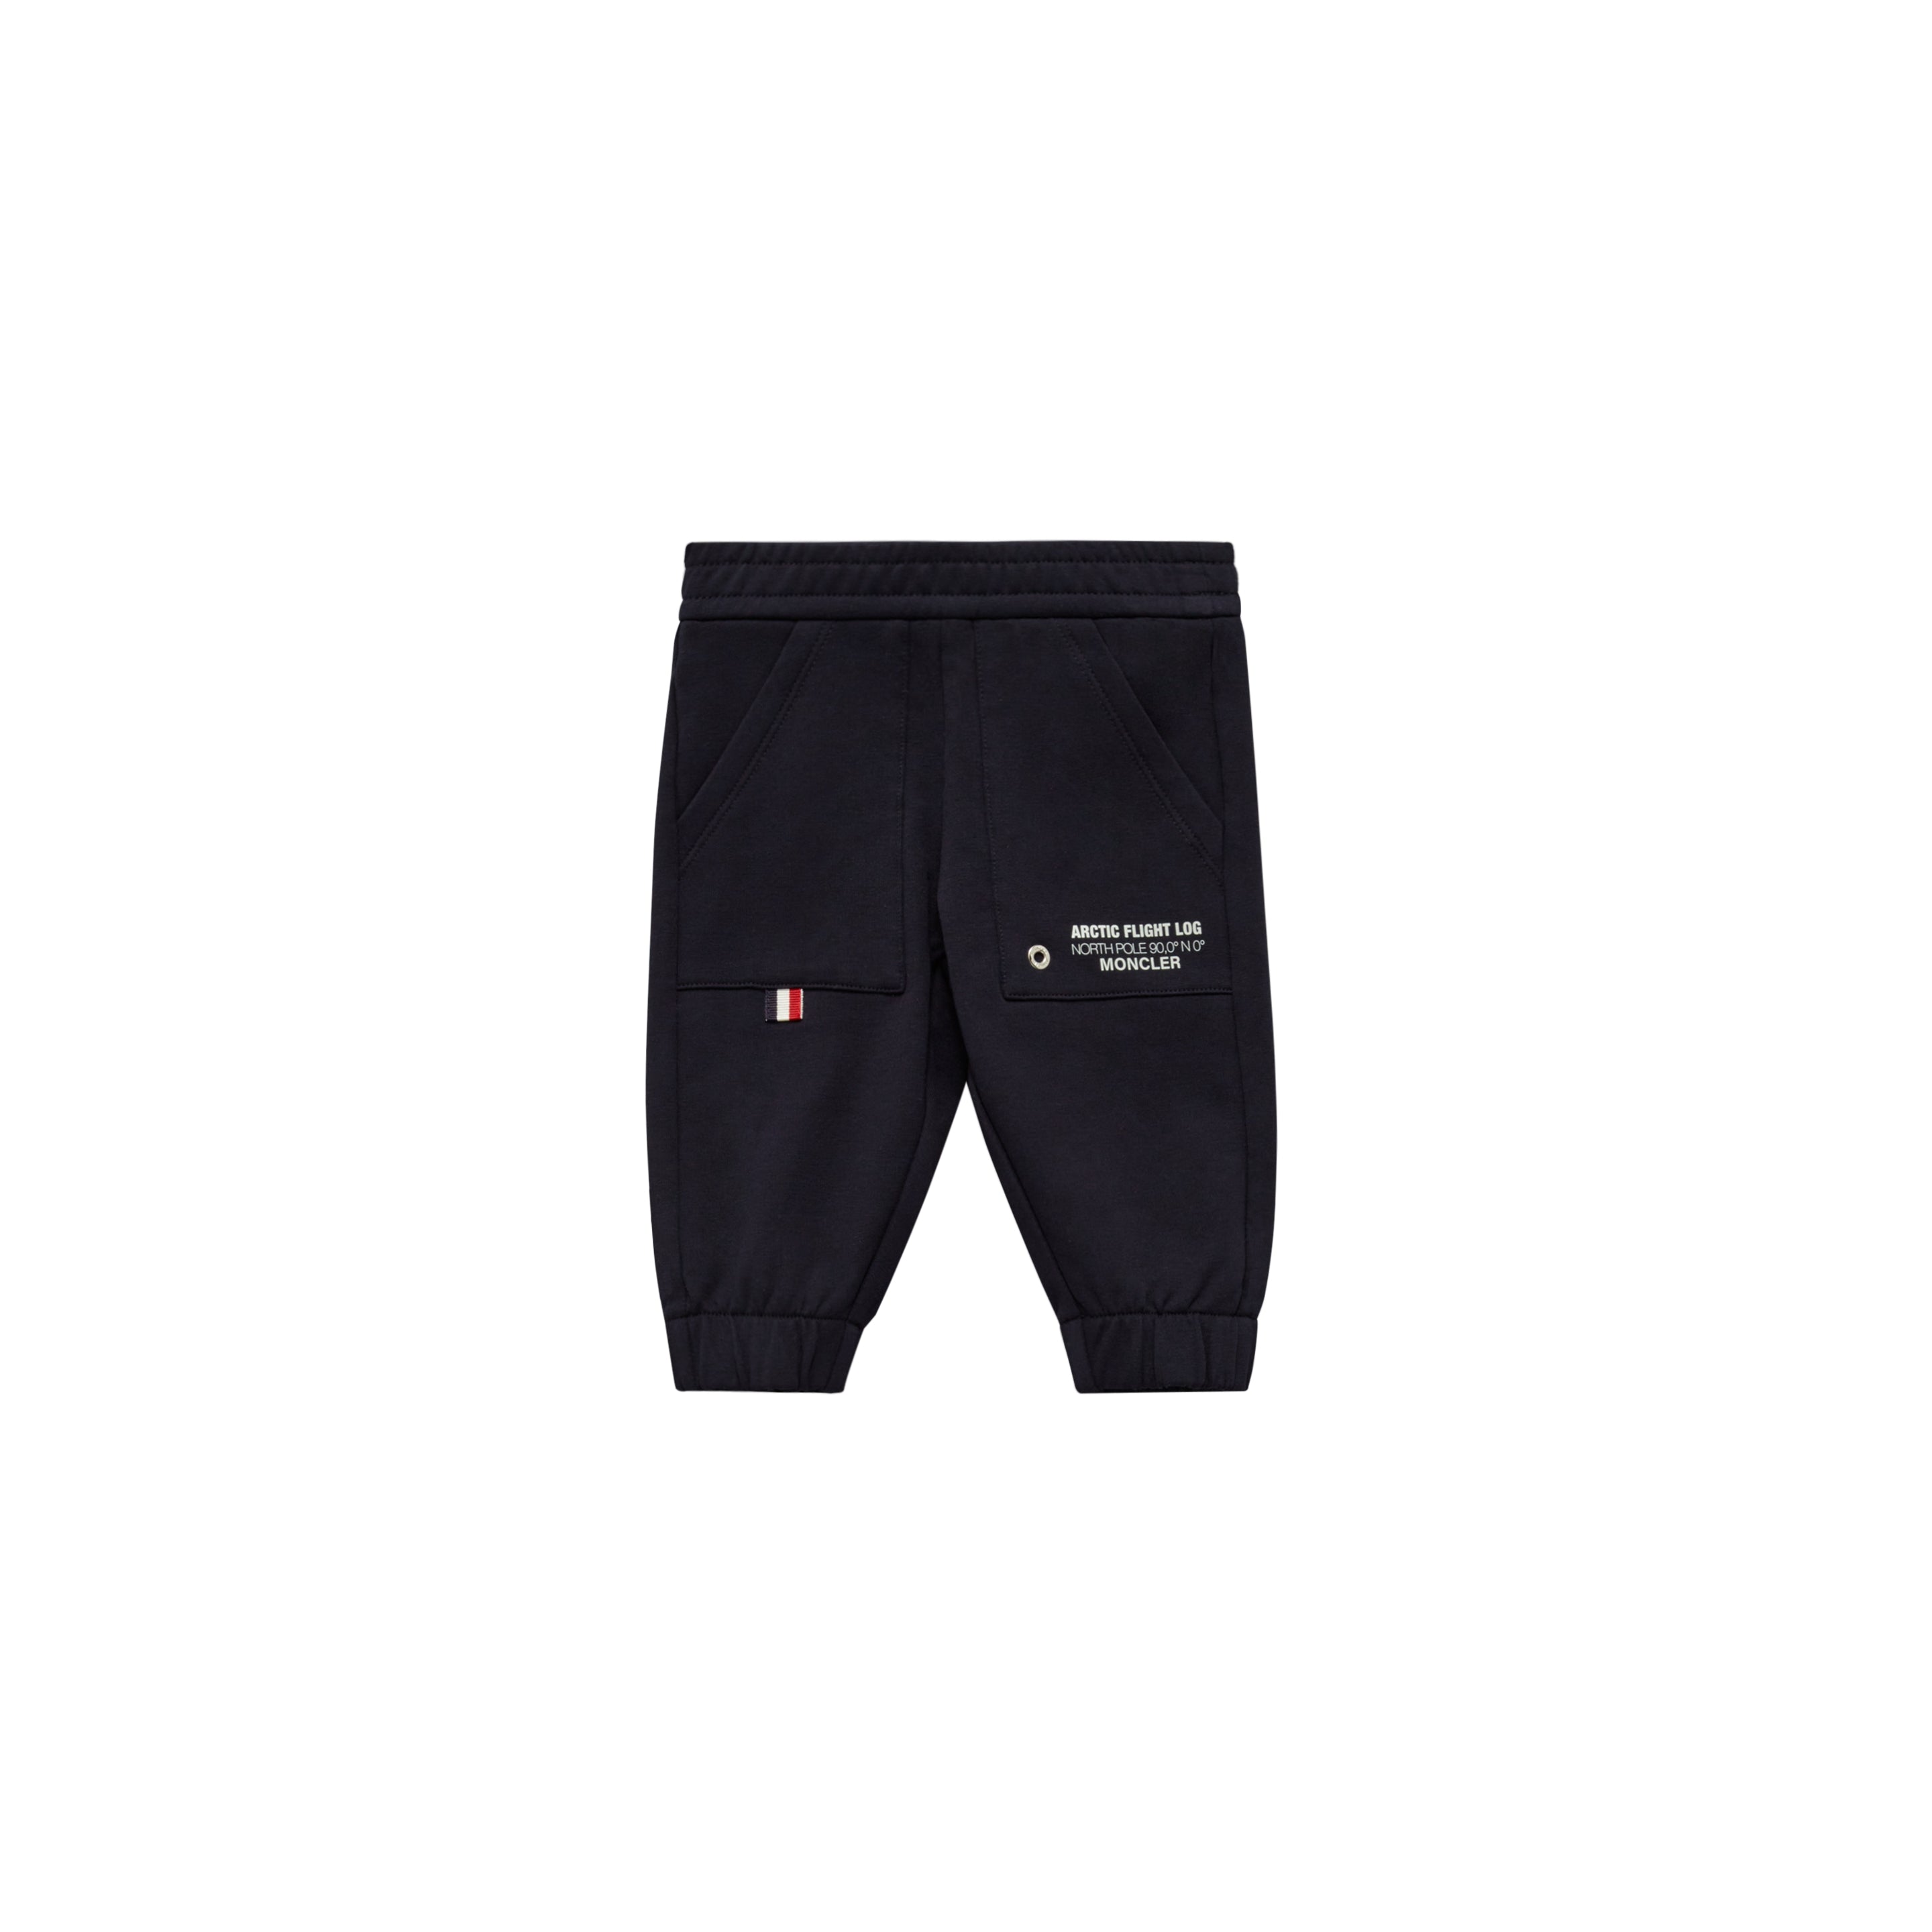 Baby Boys Navy Cotton Trousers